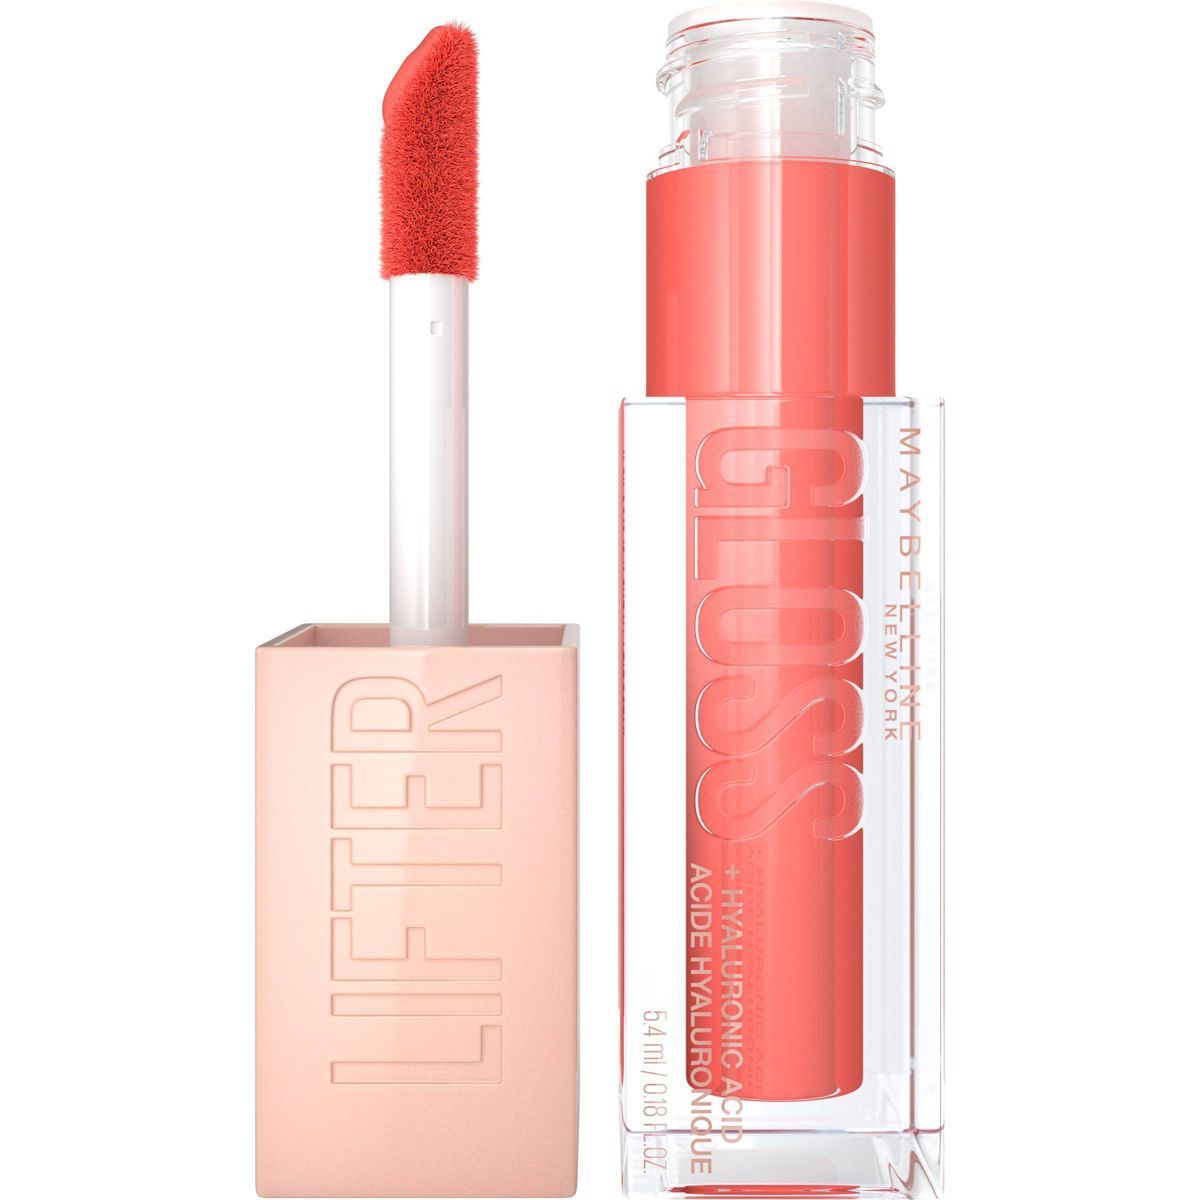 Maybelline Lifter Gloss Plumping Lip Gloss with Hyaluronic Acid - 22 Peach Ring - 0.18 fl oz | Target